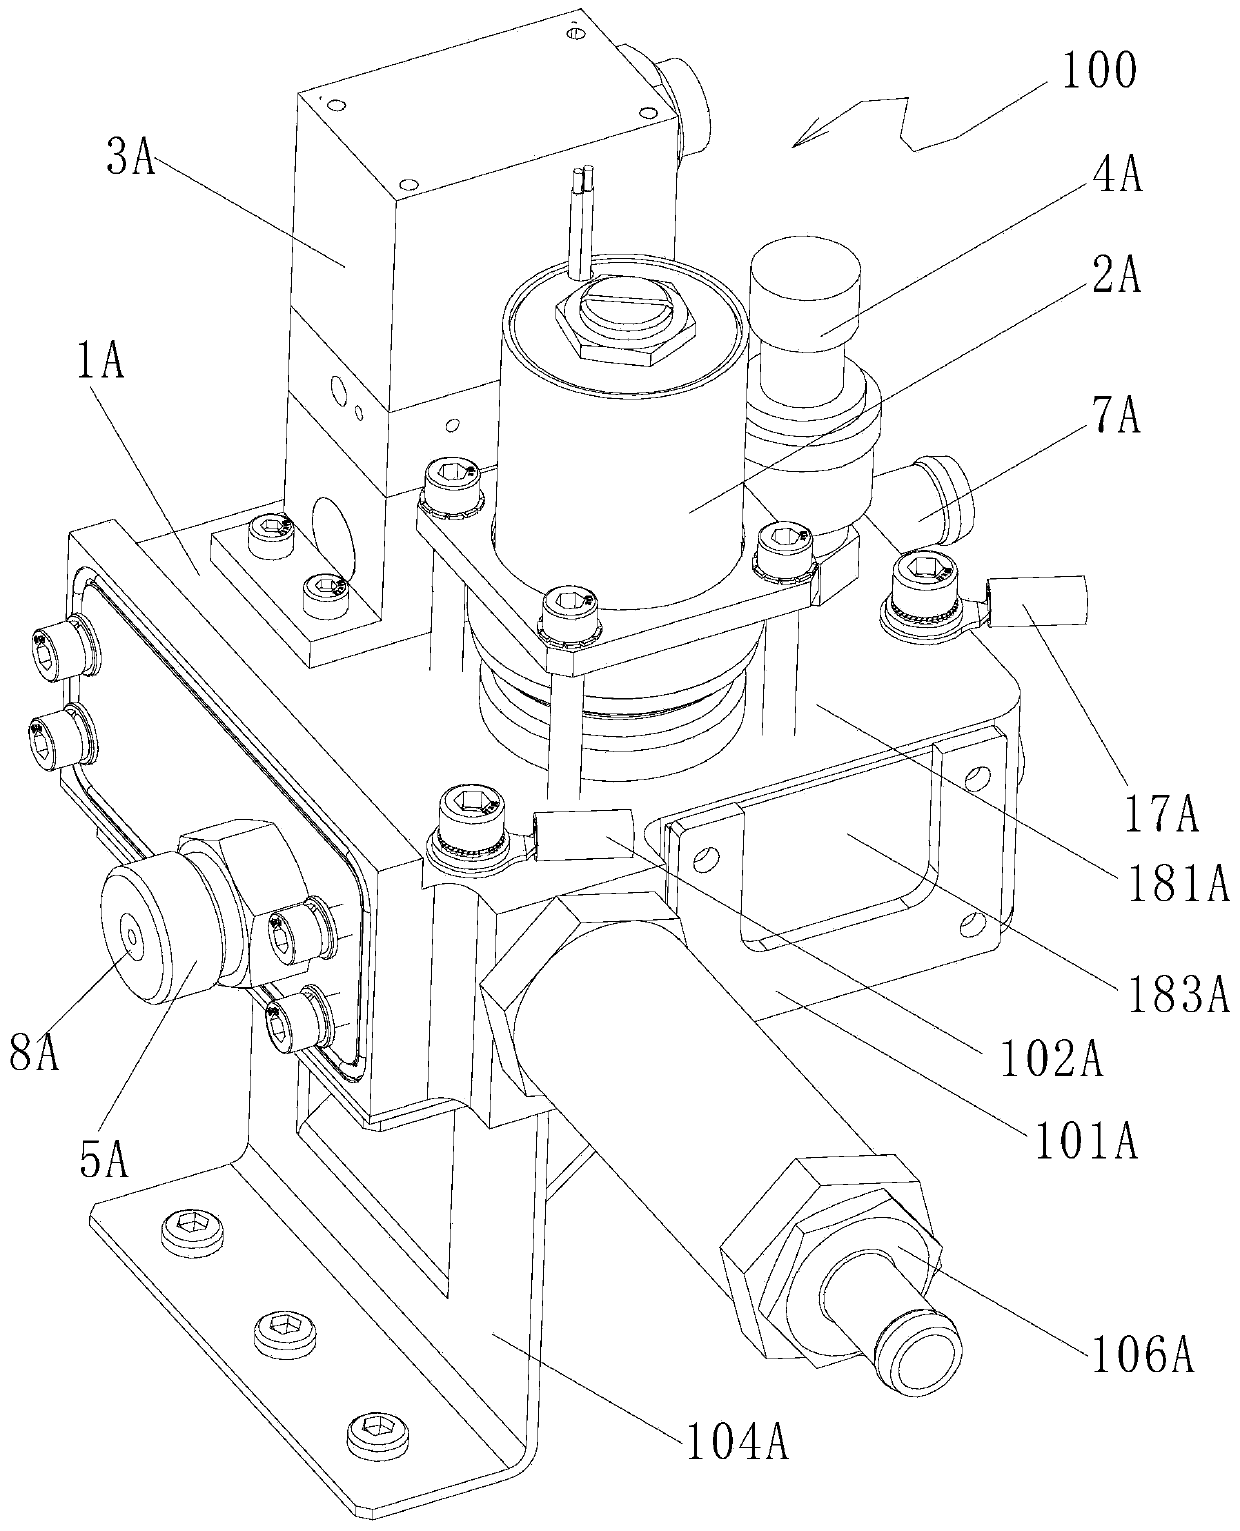 Hydrogen-inlet adjustment assembly device of fuel cell and fuel cell employing hydrogen-inlet adjustment assembly device